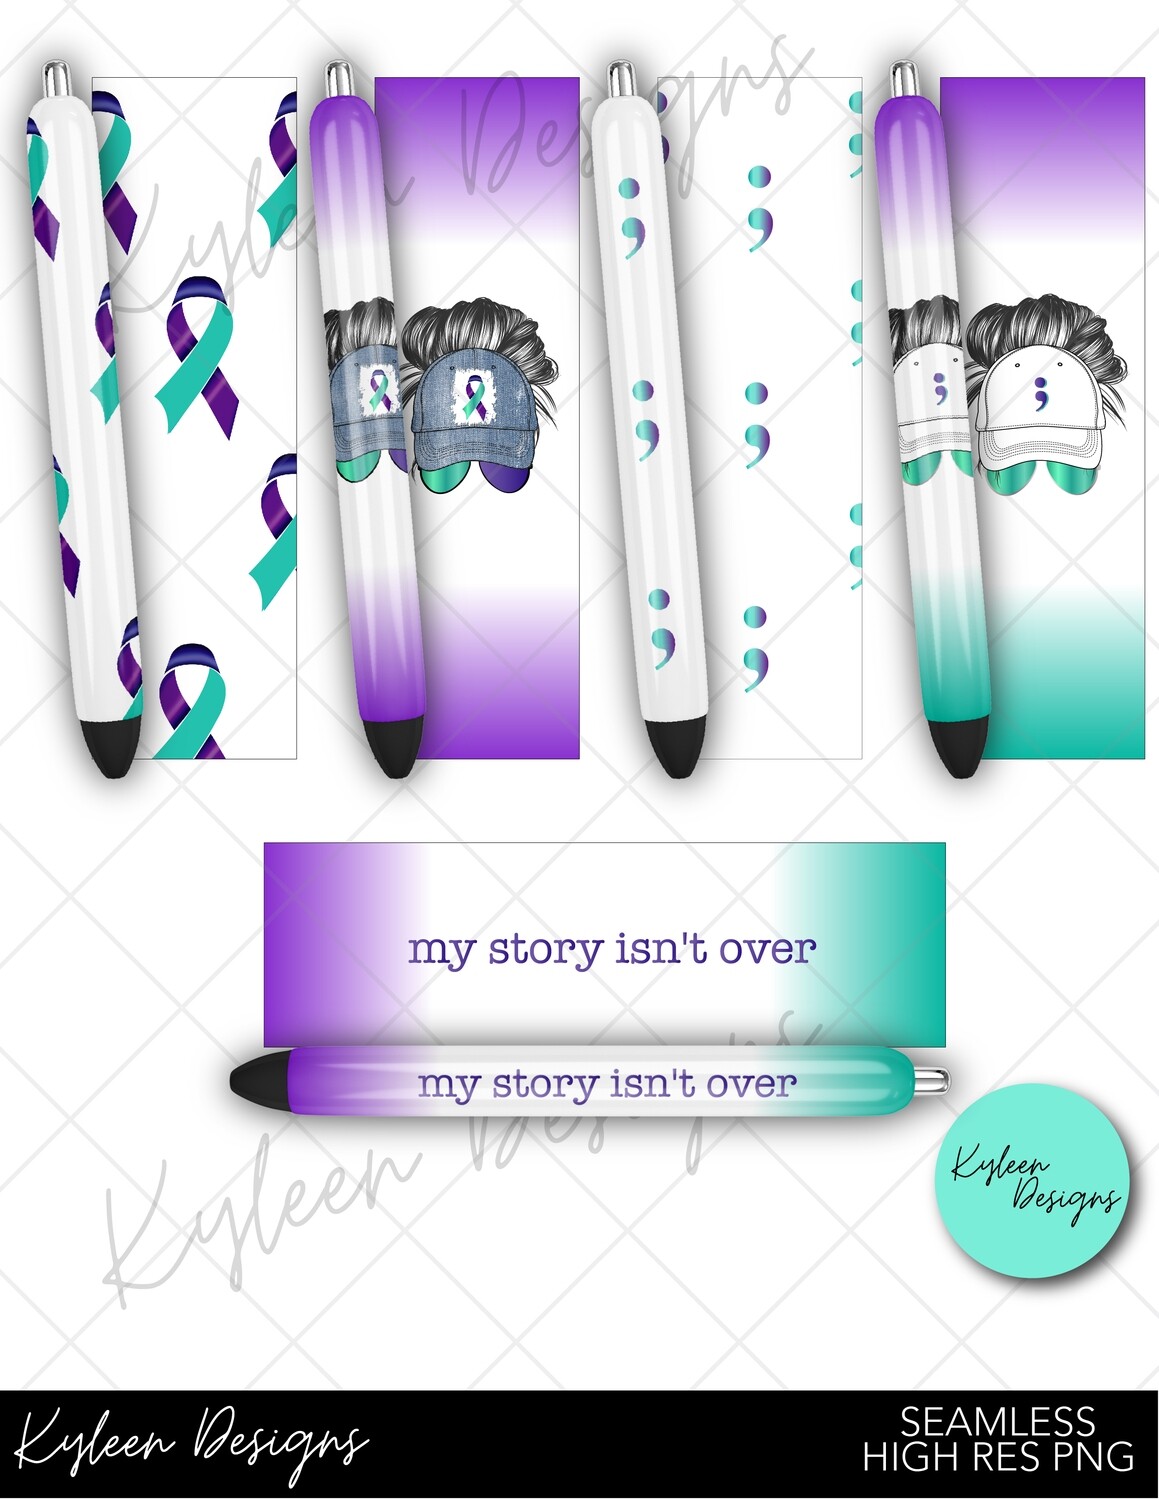 Seamless suicide awareness Pen Wrappers™  for waterslide High Res PNG file